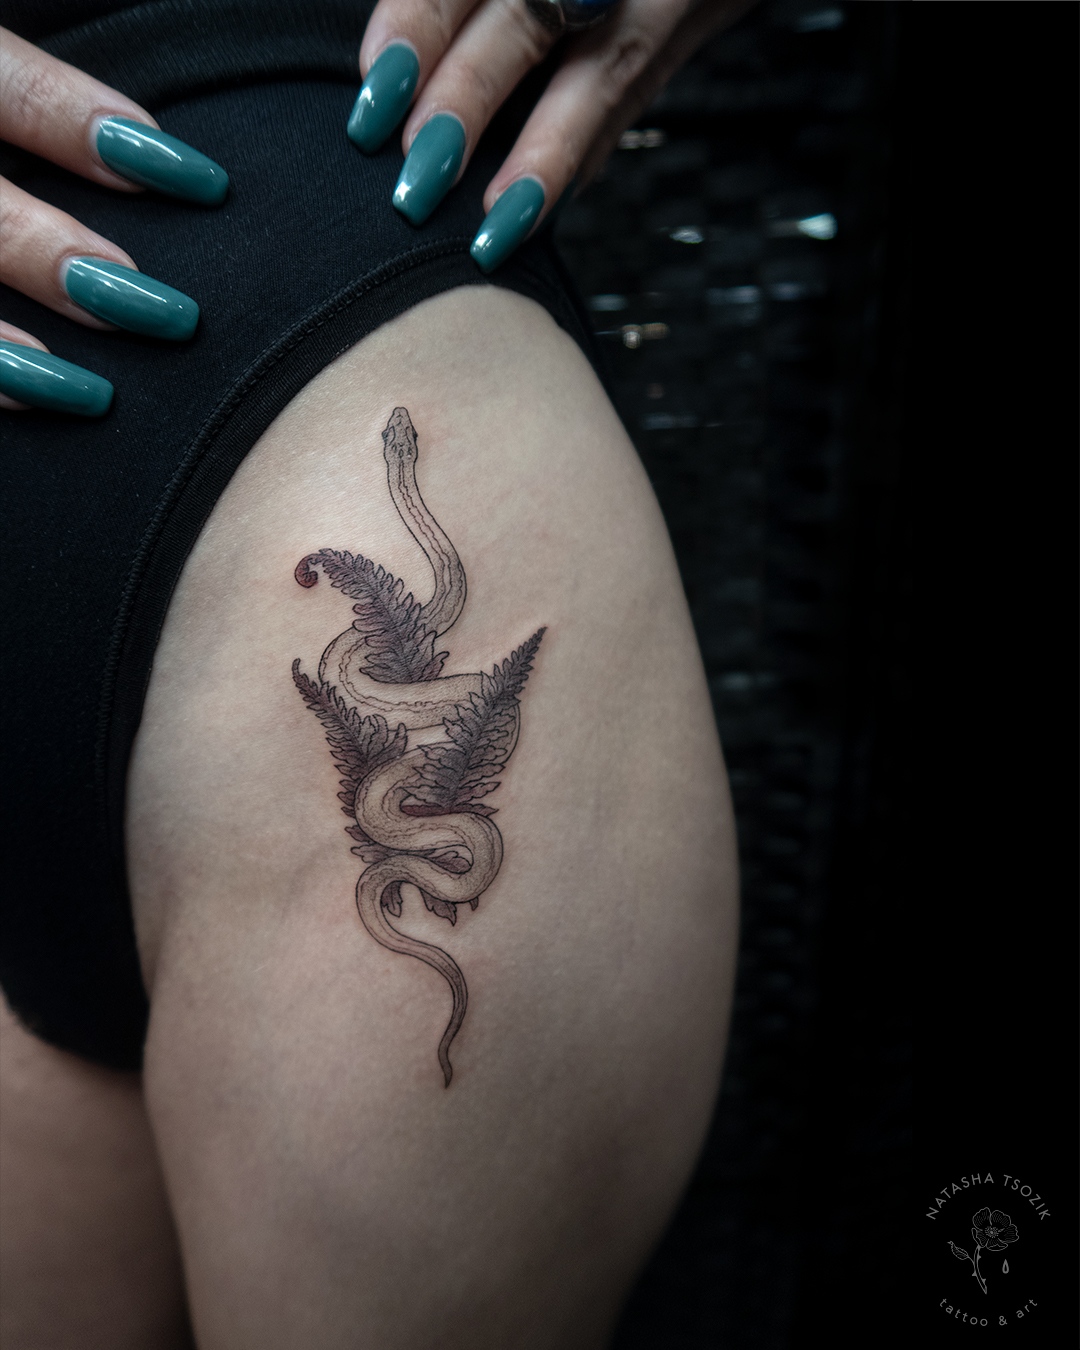 A snake with fern tattoo on a thigh.